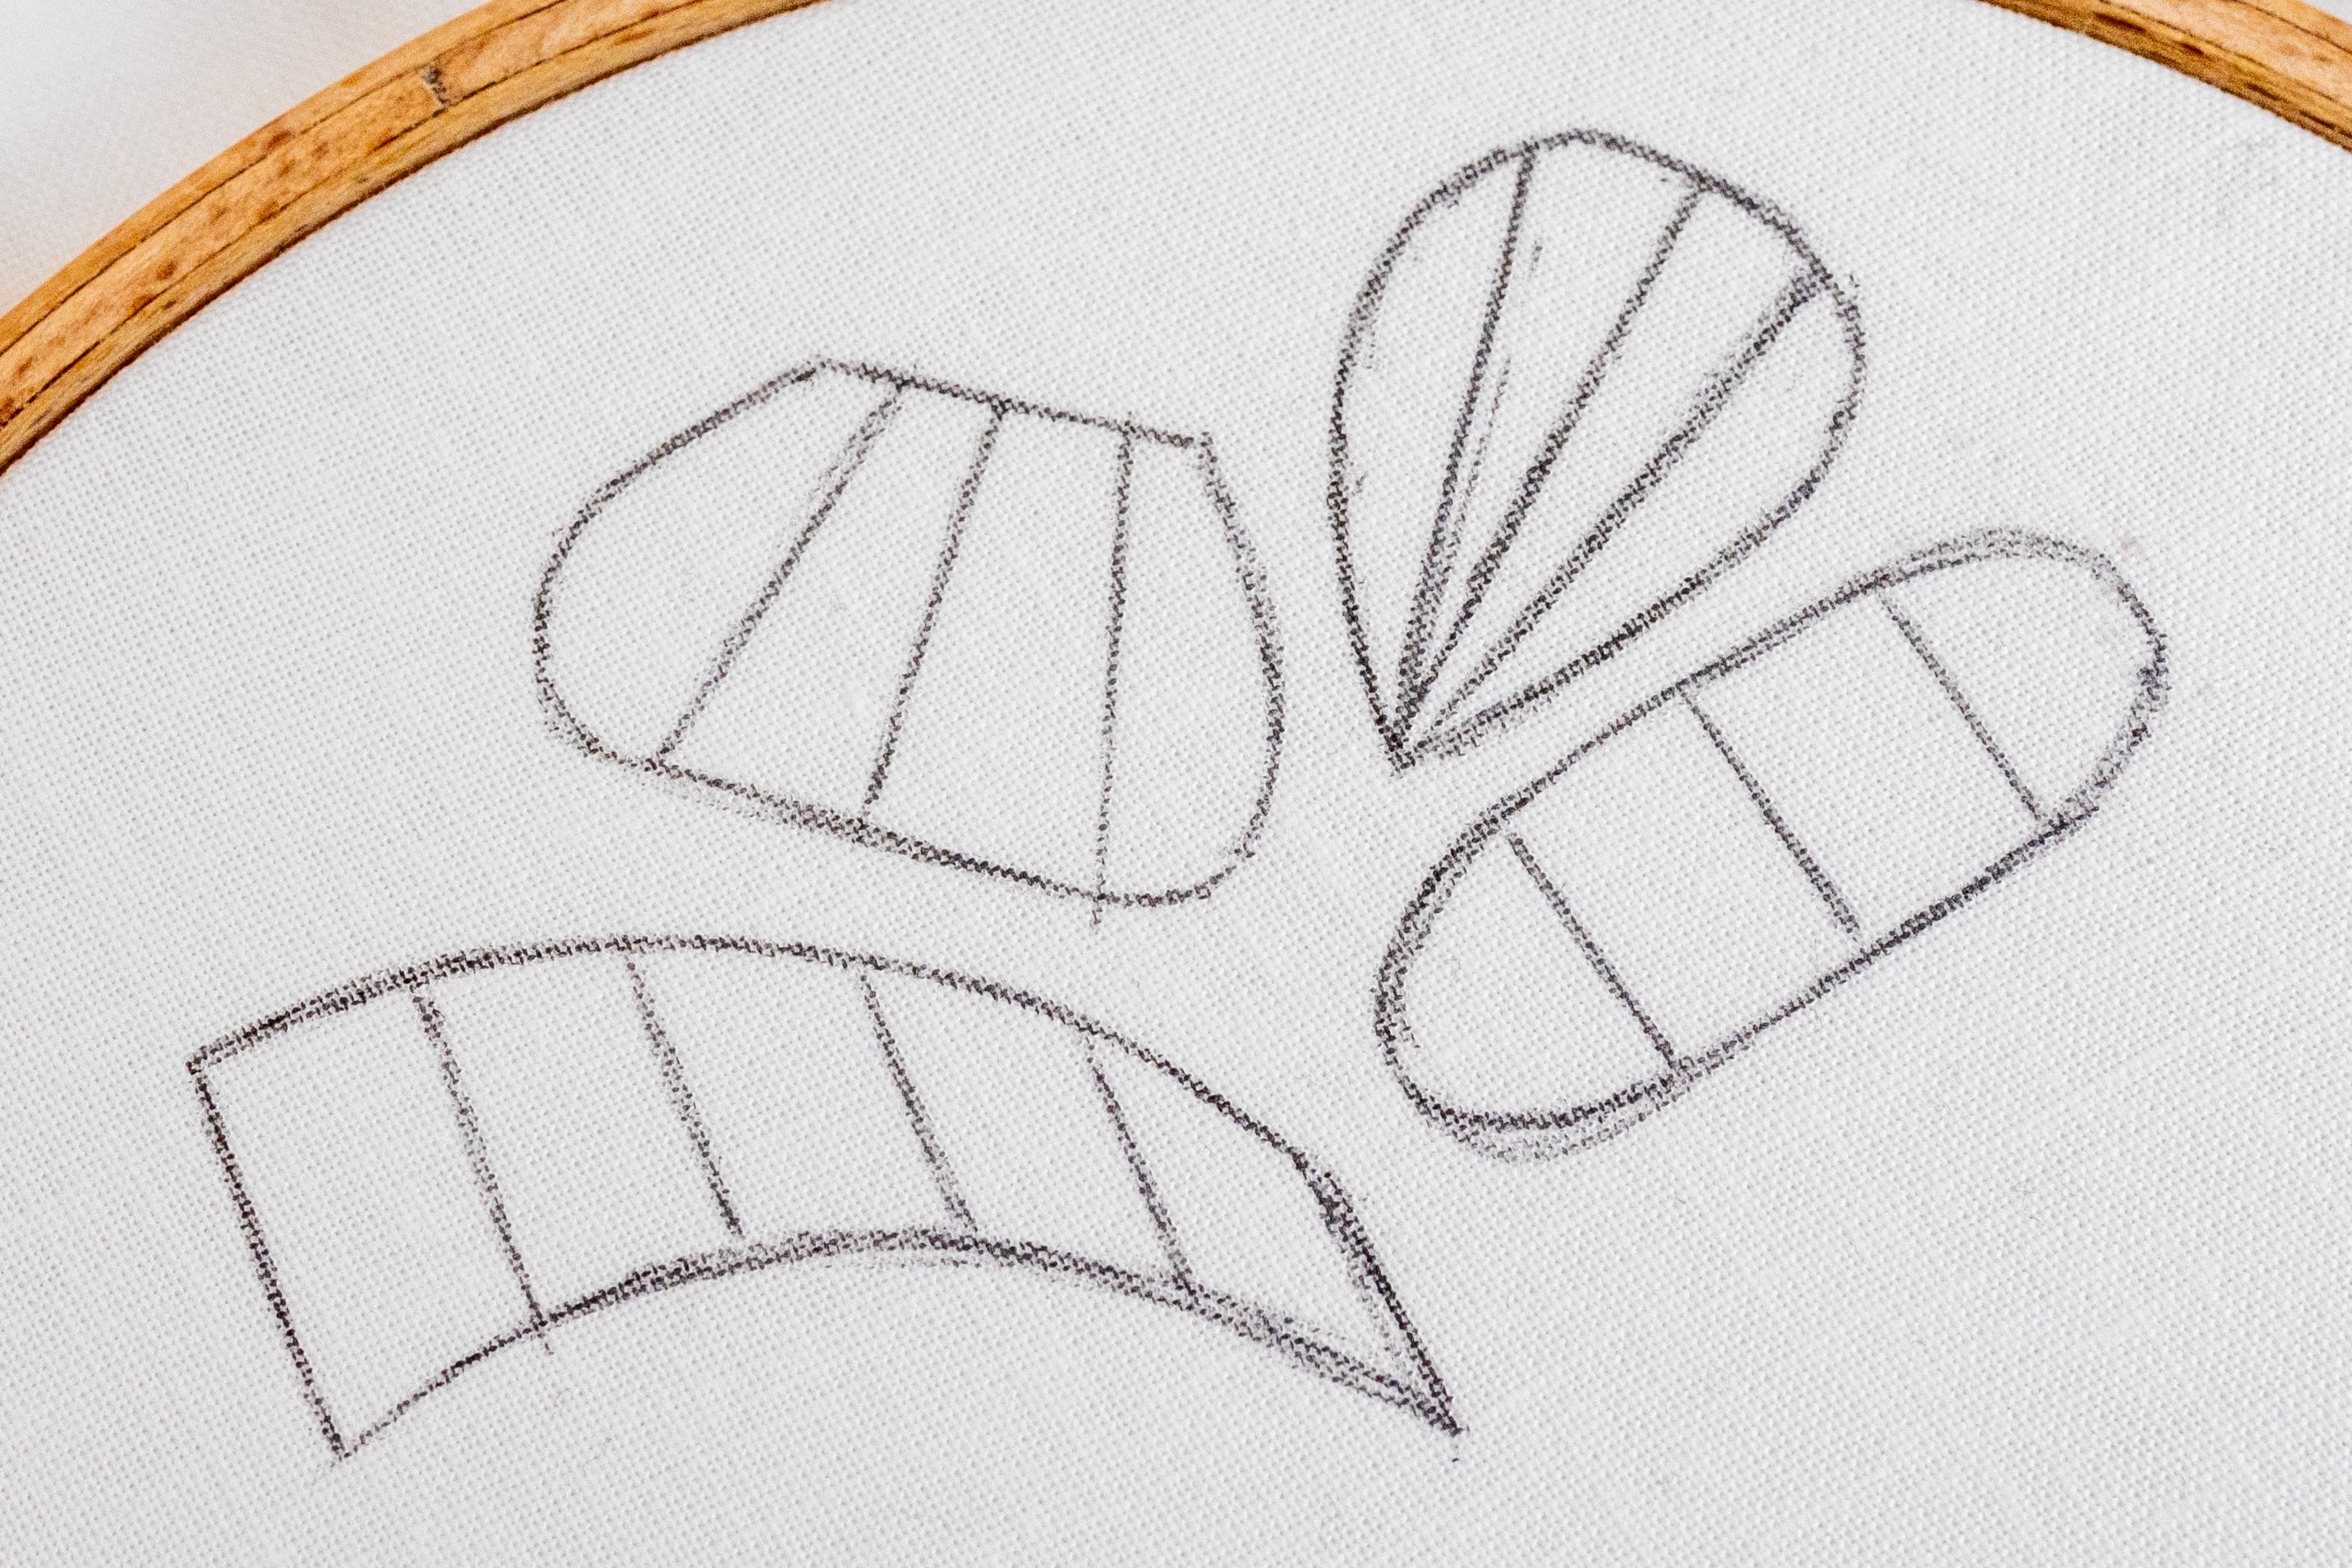 Outlines of different satin stitch shapes with sectional/directional lines drawn on have been drawn on cotton fabric.